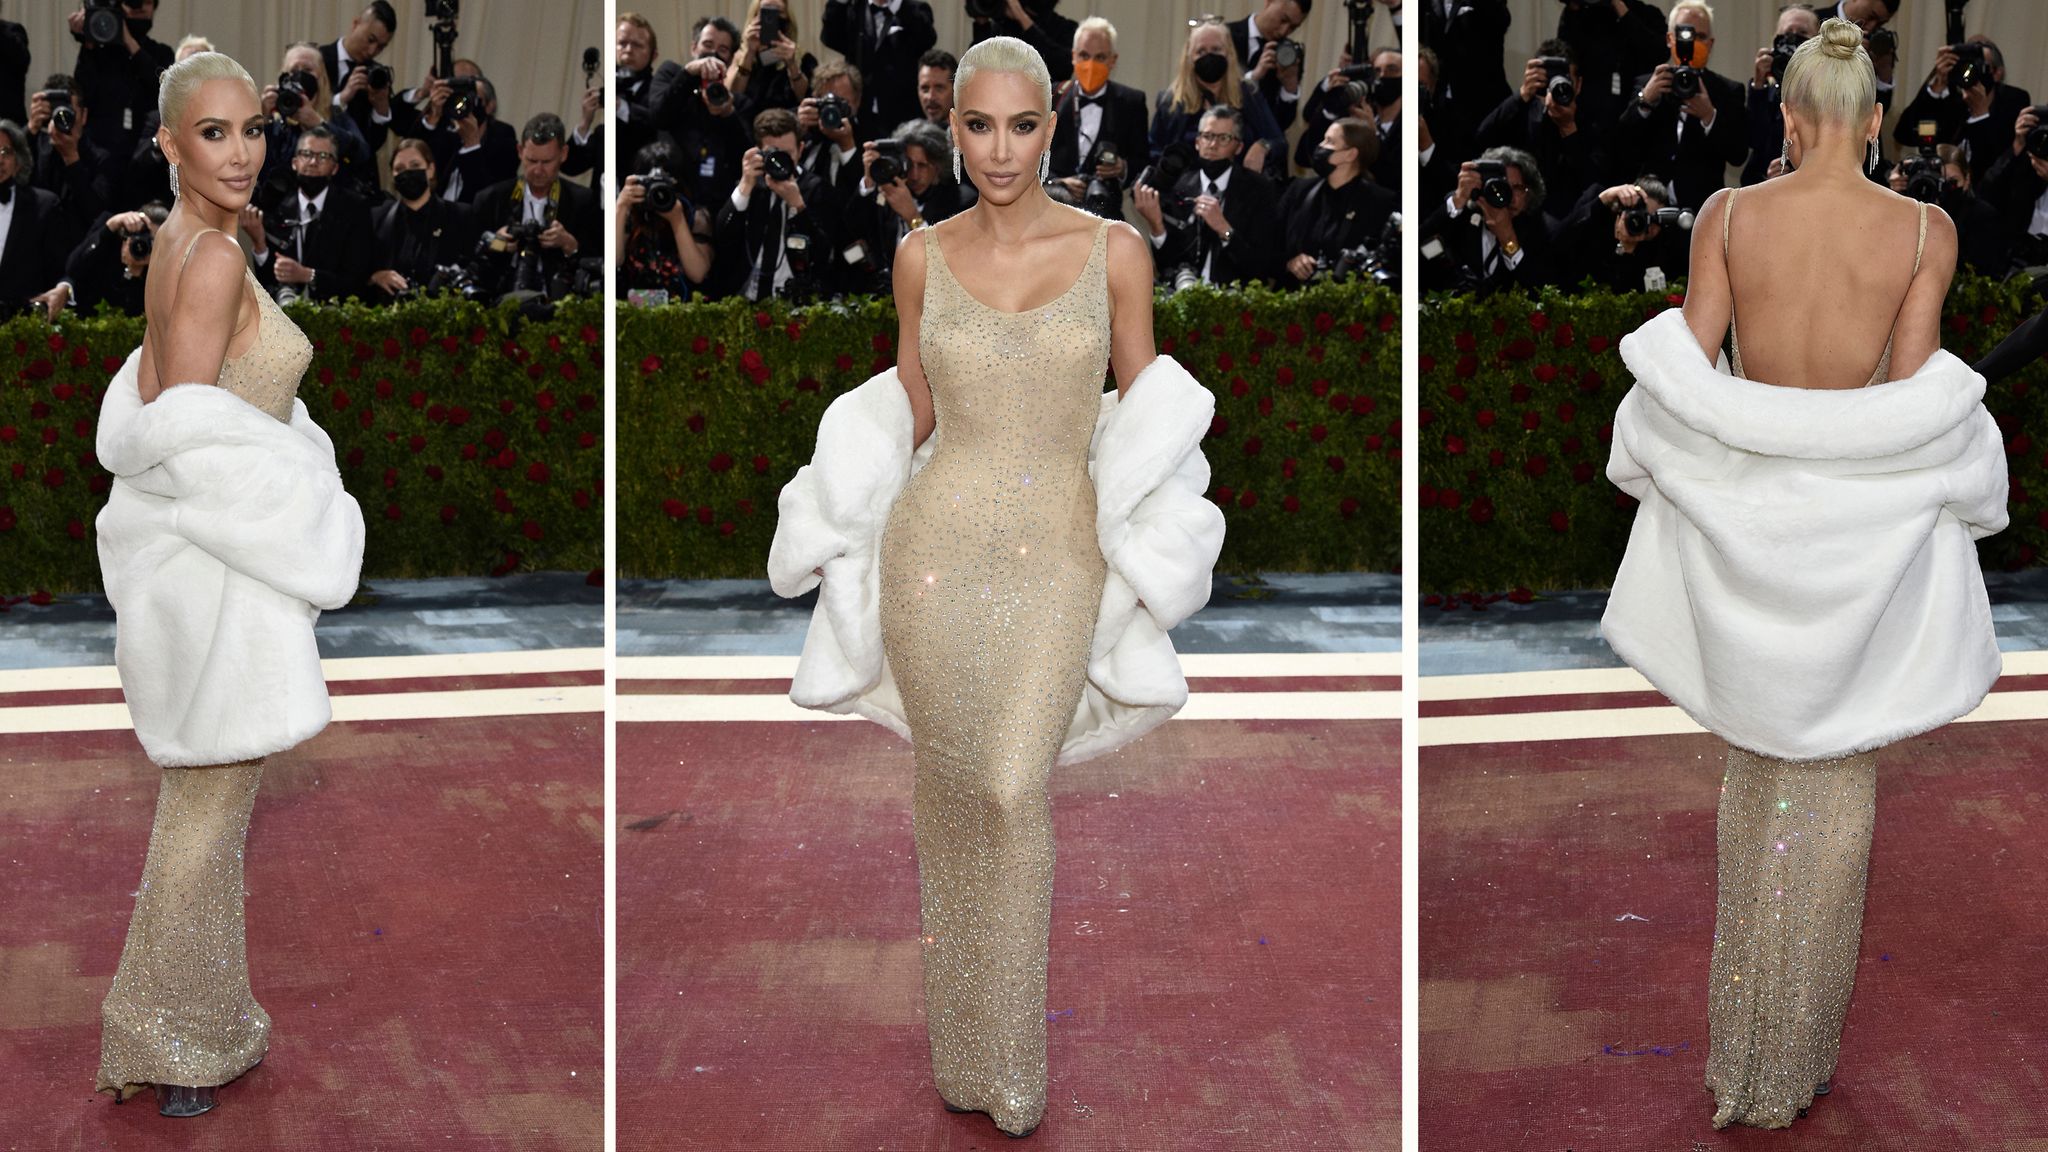 Kim Kardashian wore Marilyn Monroe's THIS iconic dress for Met Gala 2022.  Full Story here - India Today